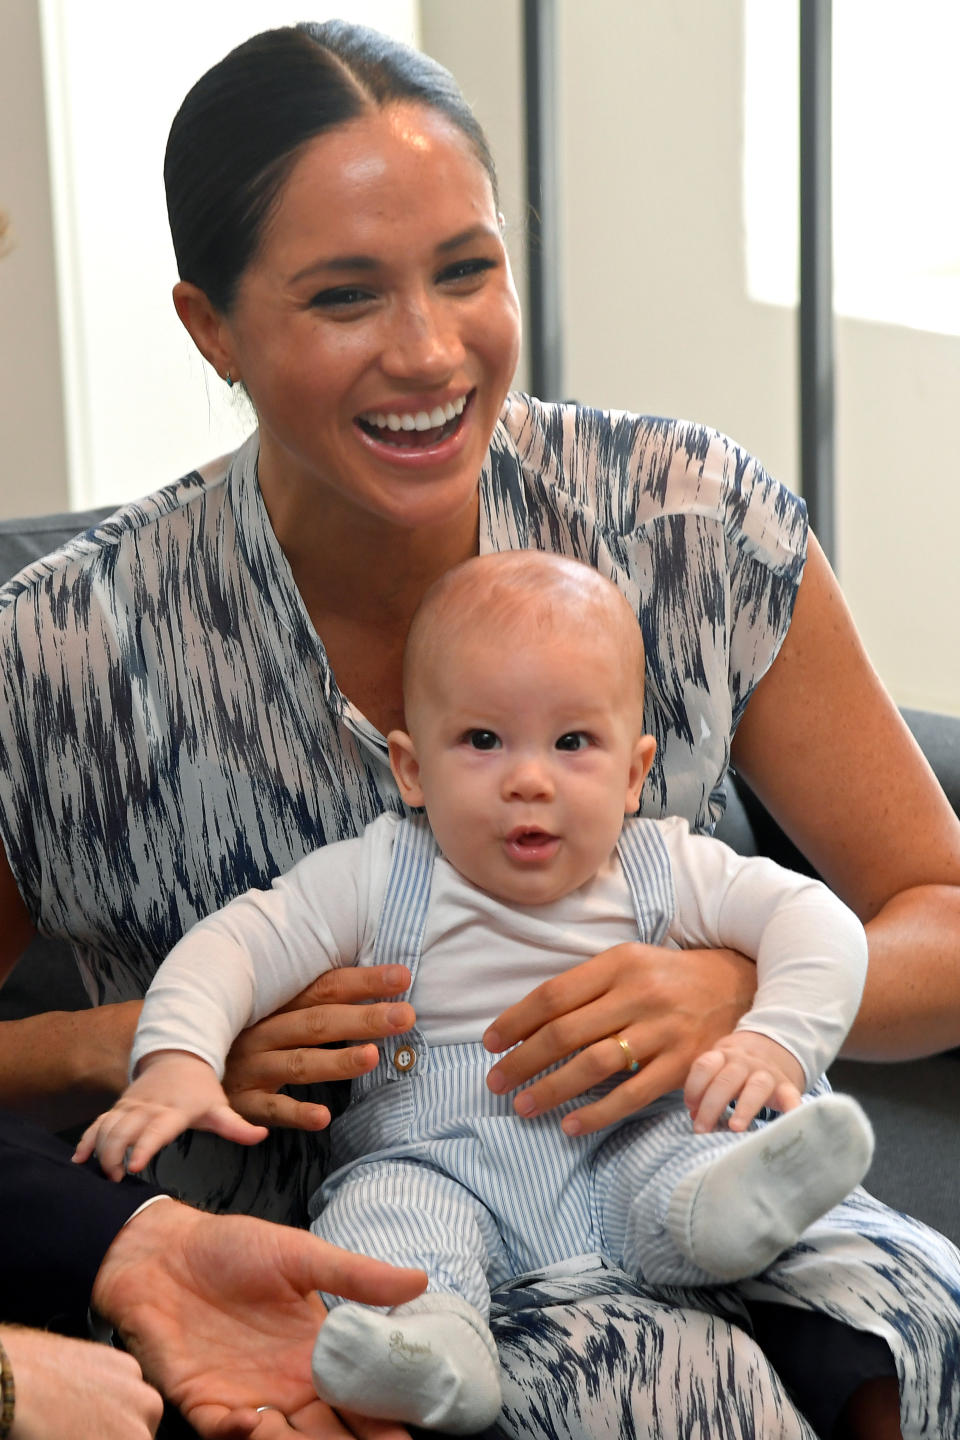 September 25, 2019: Meghan Markle holds four-month-old Archie during a meeting with Archbishop Desmond Tutu t the Desmond & Leah Tutu Legacy Foundation in Cape Town